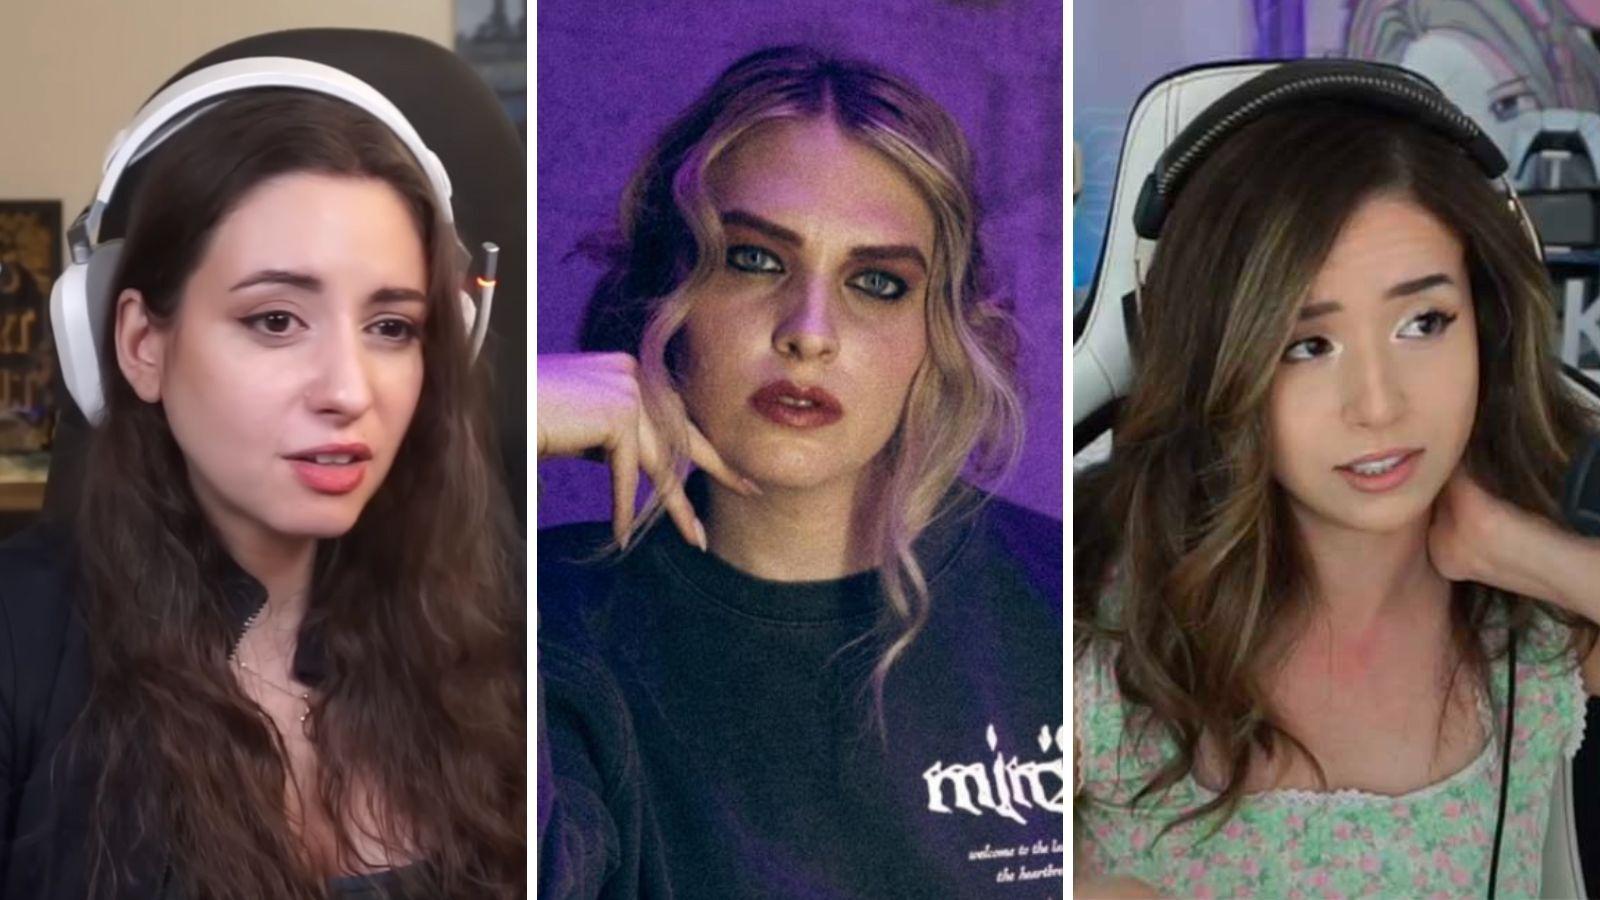 Twitch Streamer Controversy Demonstrates the Danger Of Deepfakes